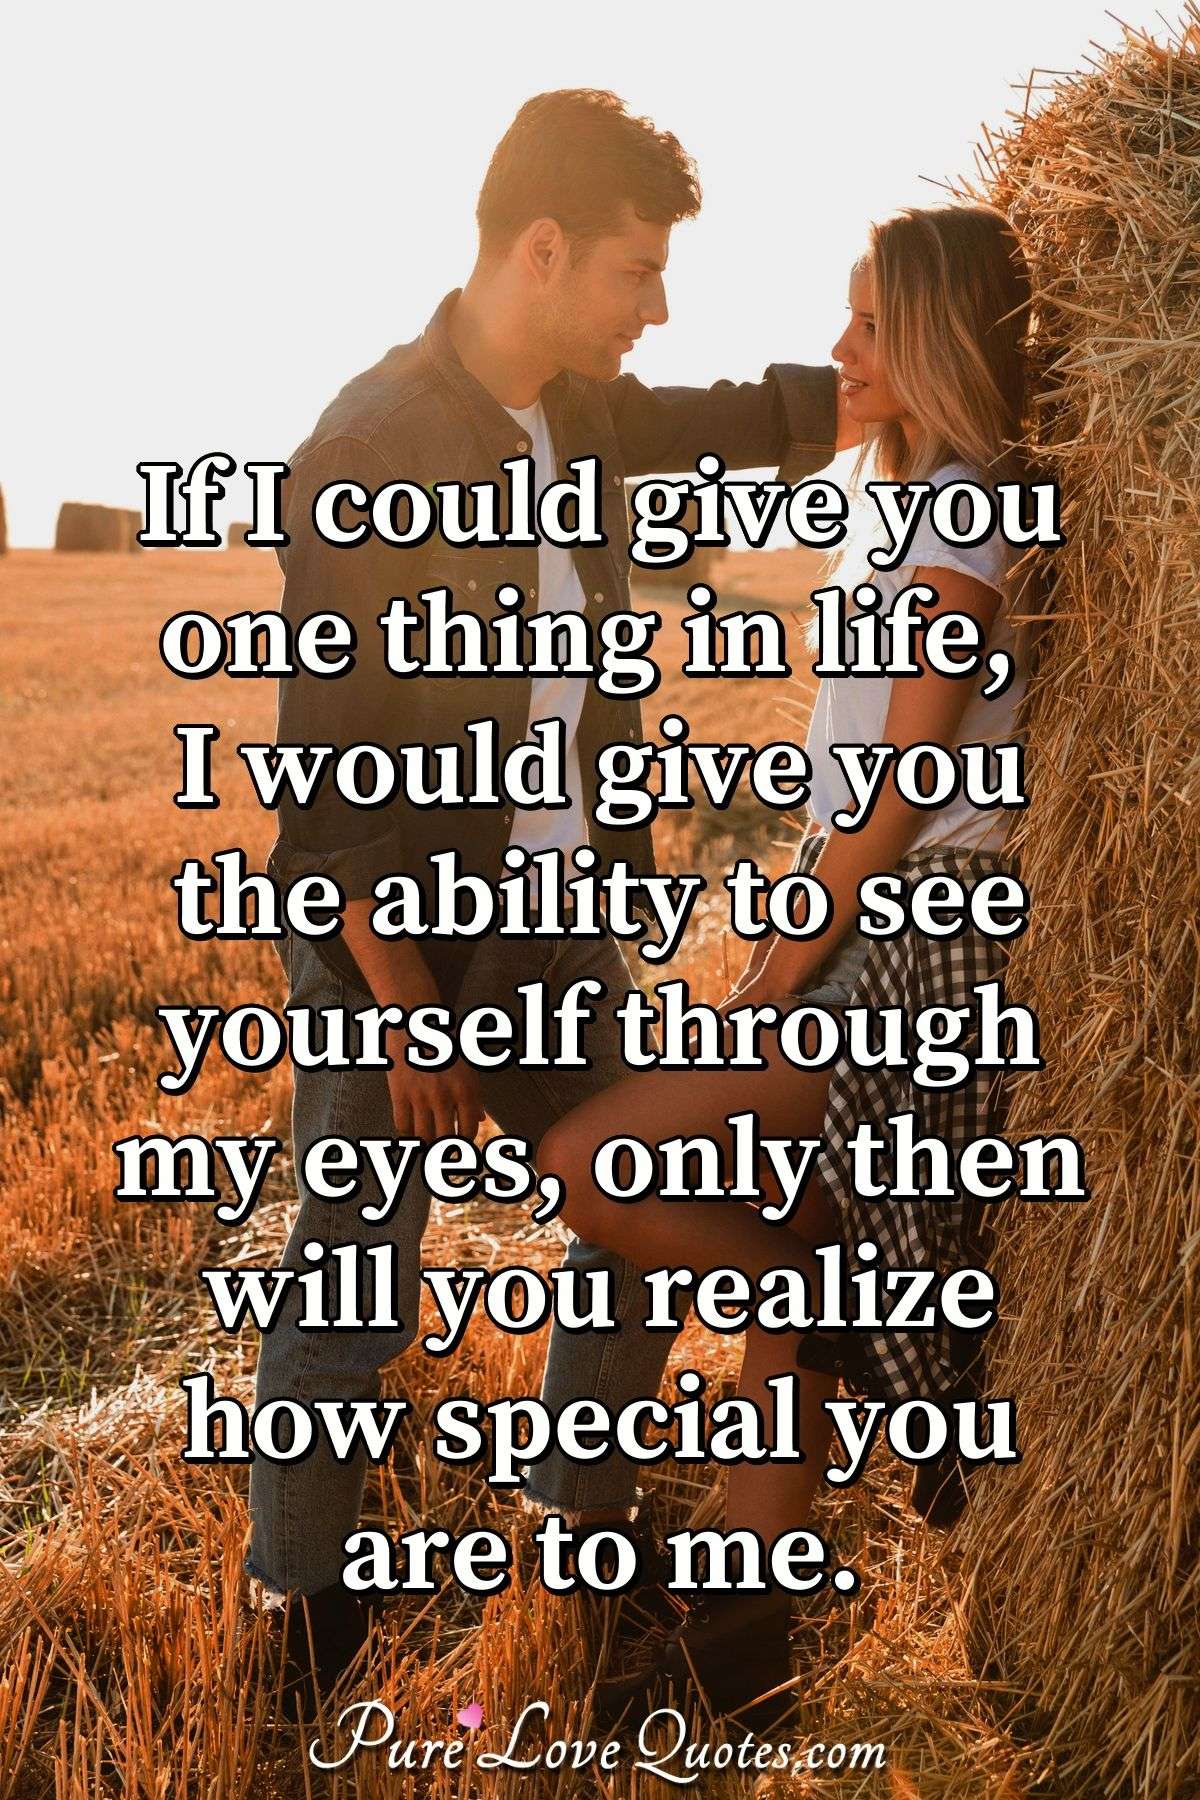 If I could give you one thing in life, I would give you the ability to see yourself through my eyes, only then will you realize how special you are to me. - Anonymous